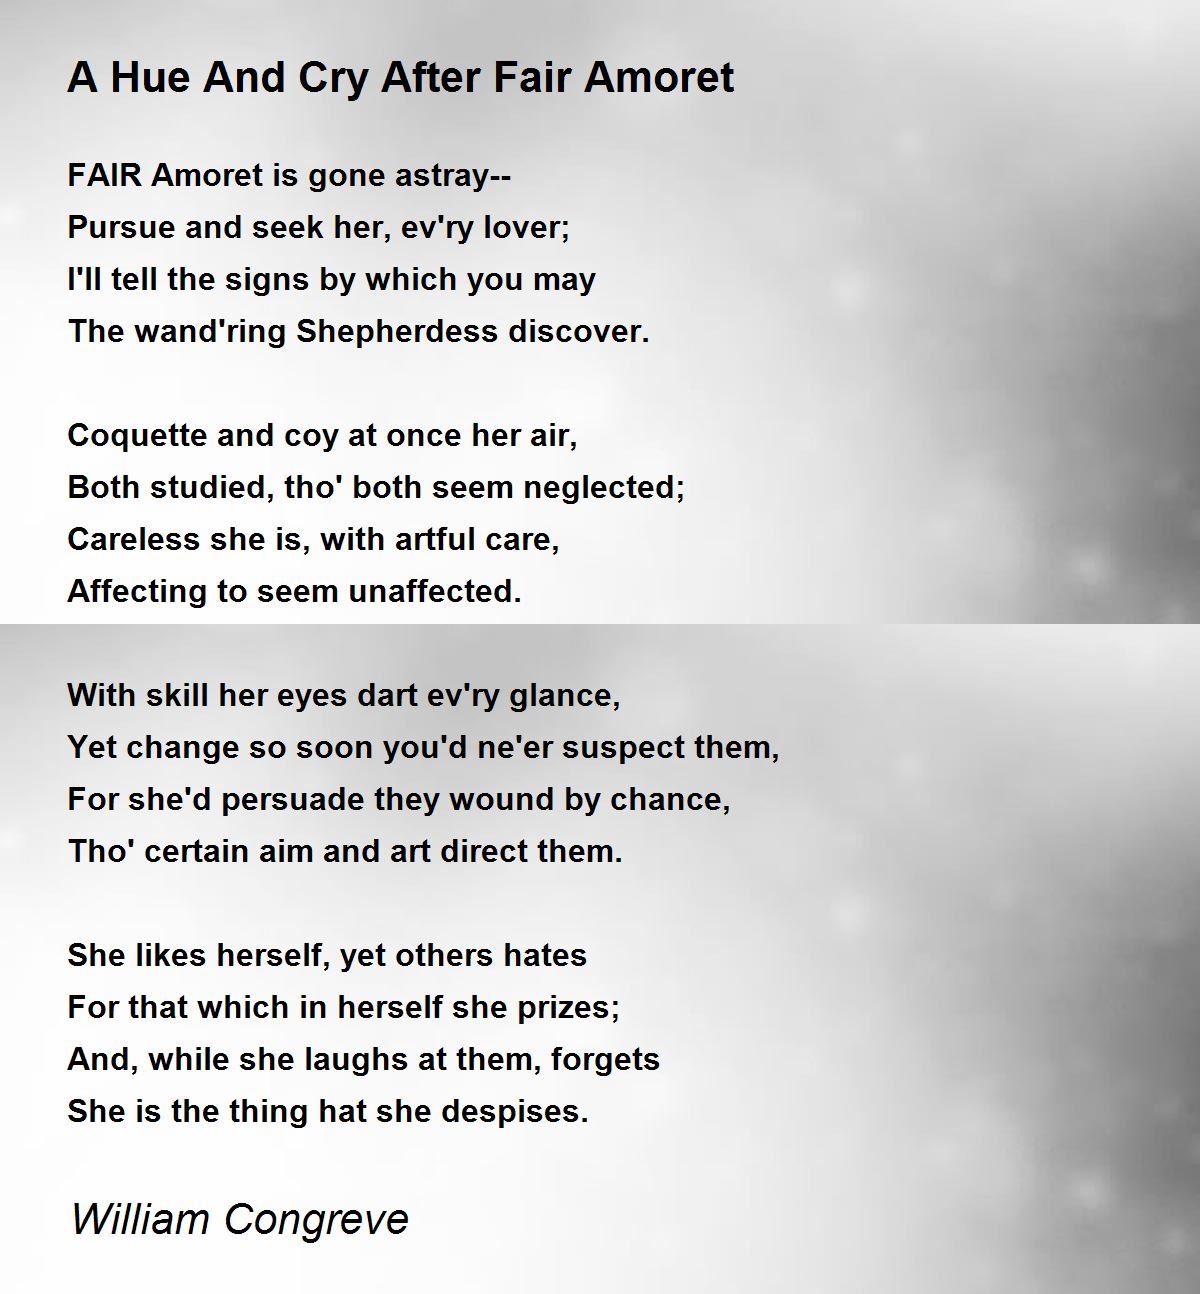 A Hue And Cry After Fair Amoret By William Congreve A Hue And Cry After Fair Amoret Poem